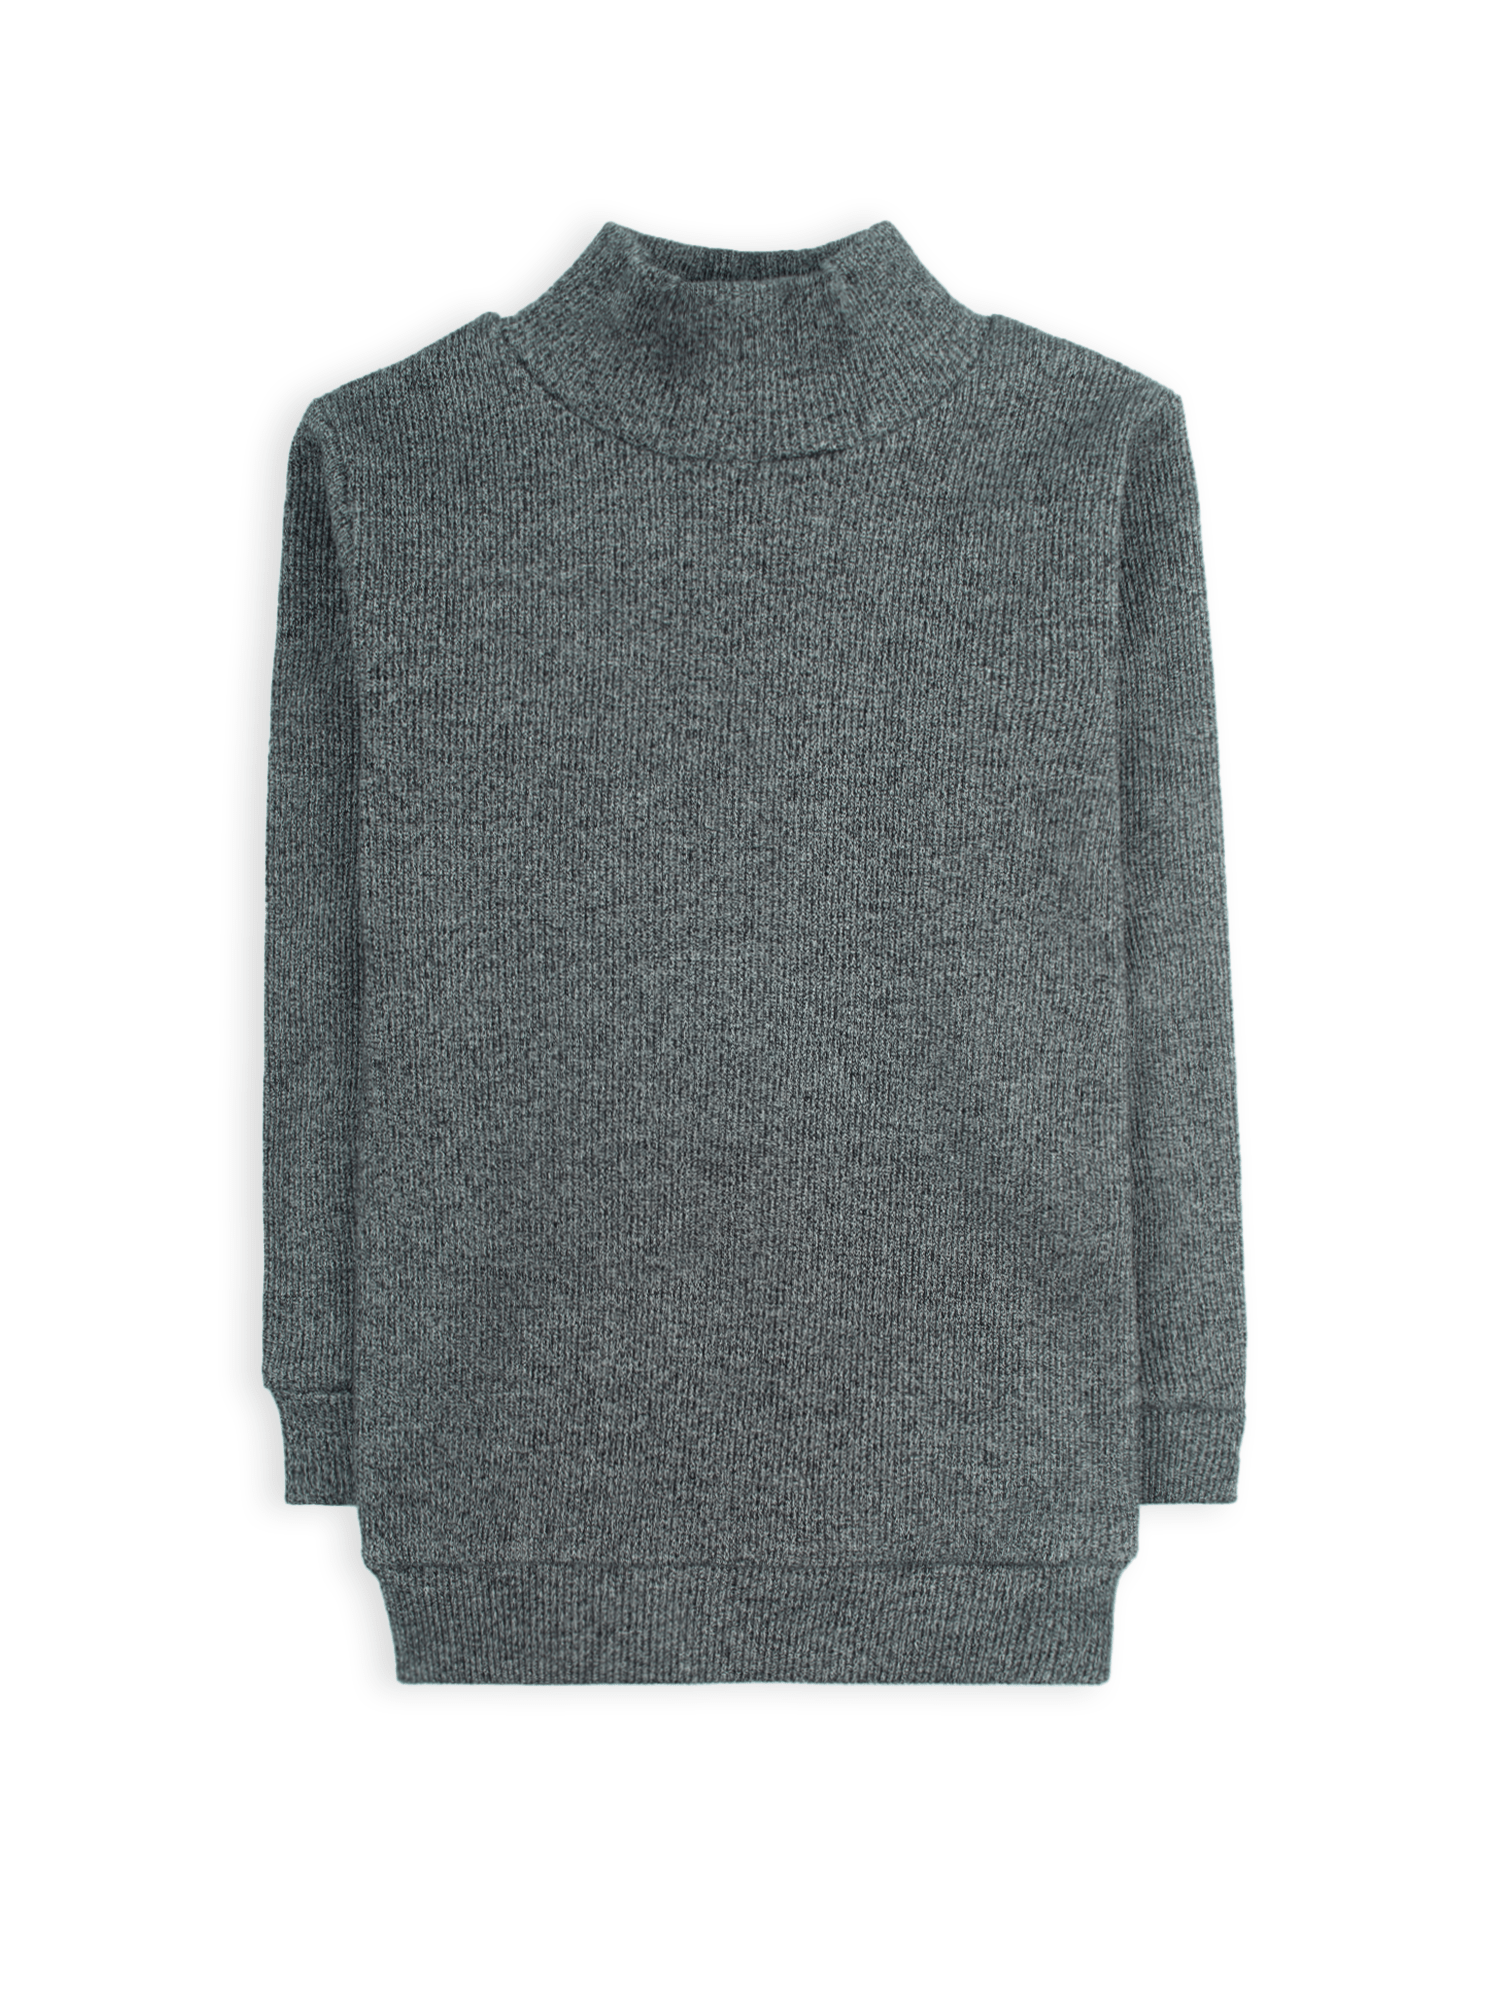 Stone Harbor BOY'S CHARCOAL TEXTURED HIGH NECK